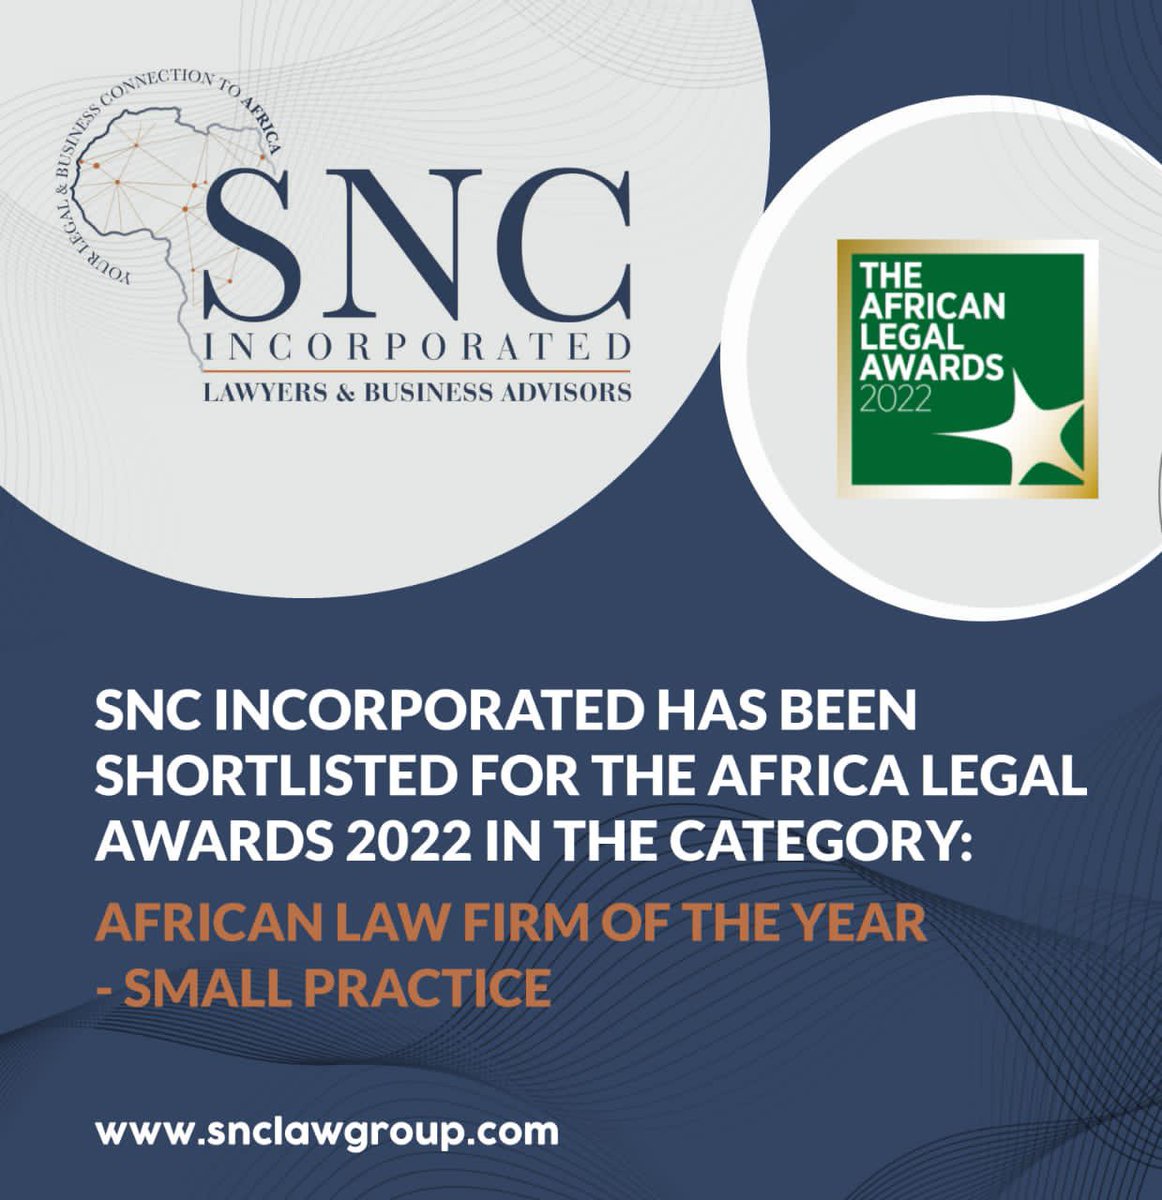 We are delighted to annouce that we have been shortlisted for the #AfricaLegalAwards2022 in the category #AfricanLawFirmOfTheYear-#SmallPractice

Click the below link to see the list of nominees

lnkd.in/dFsQZybM